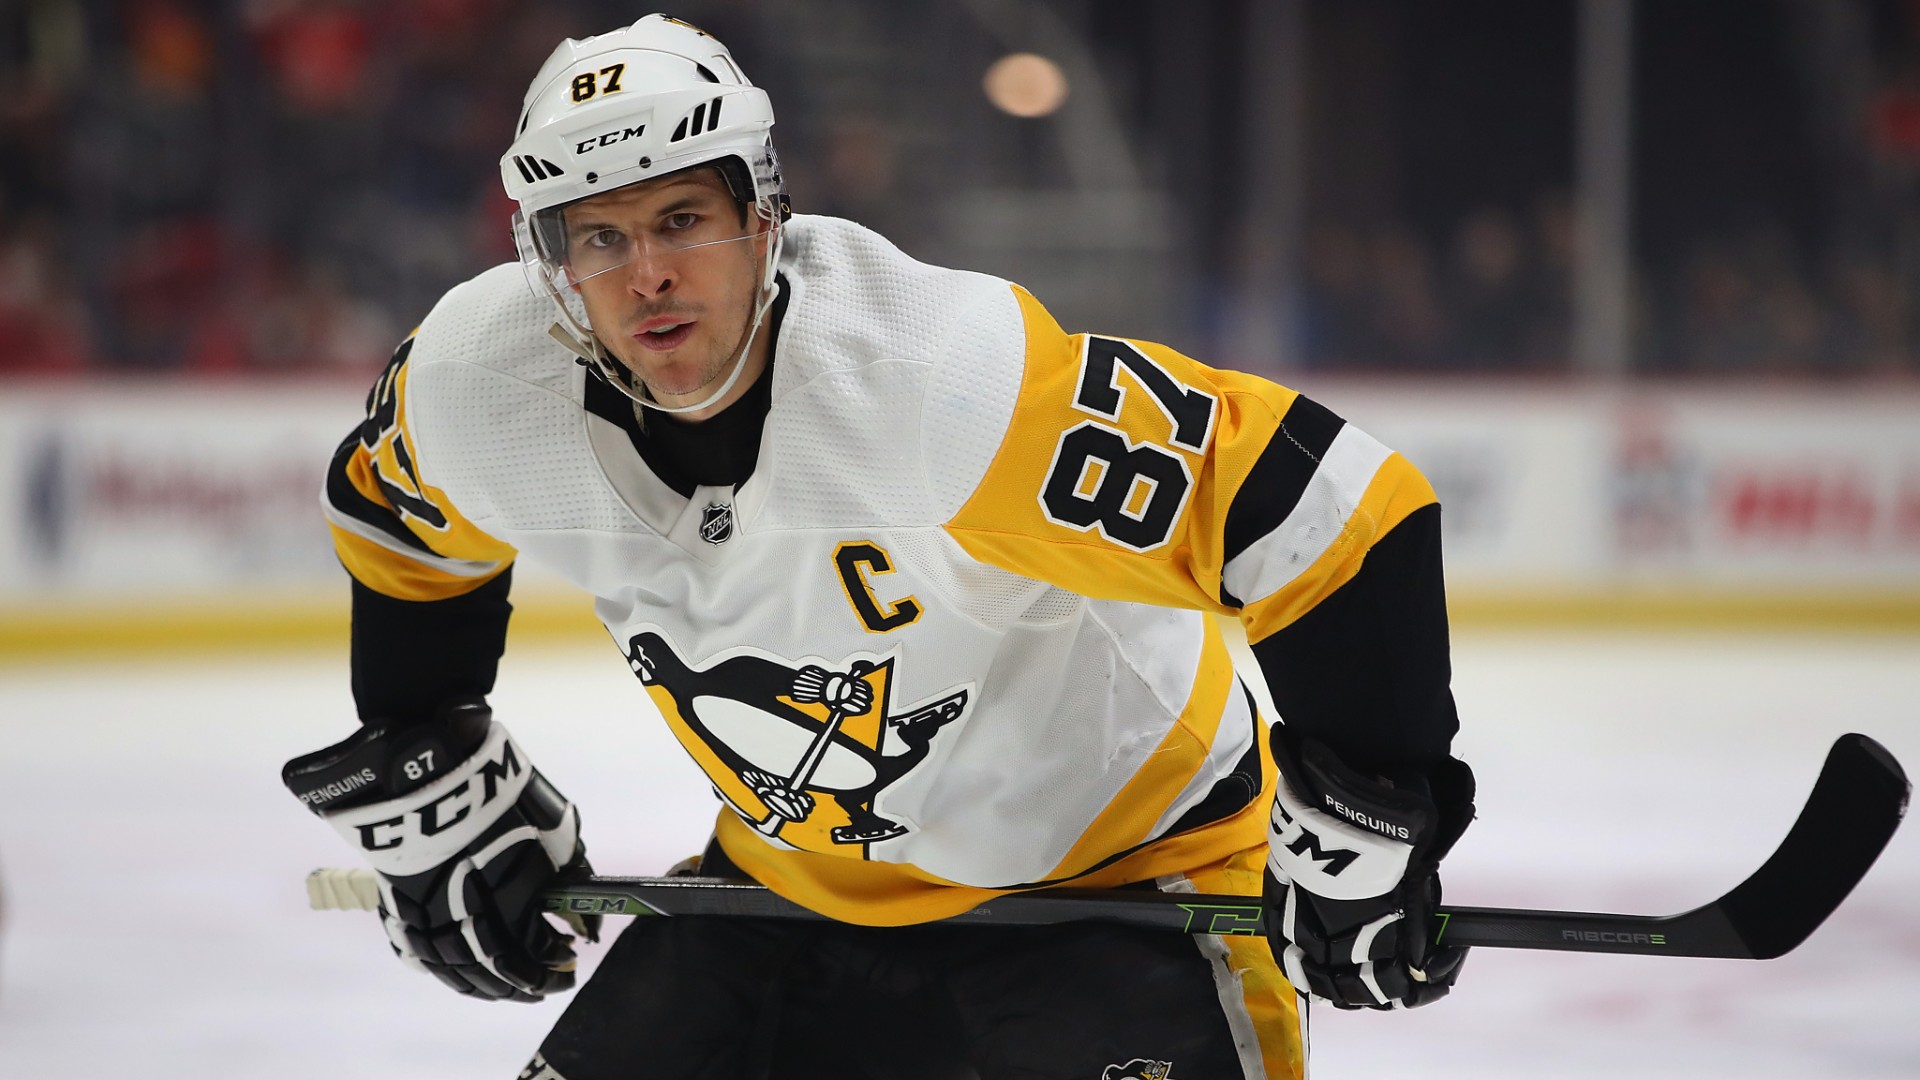 Pittsburgh Penguins' Sidney Crosby returns to play after taking puck to